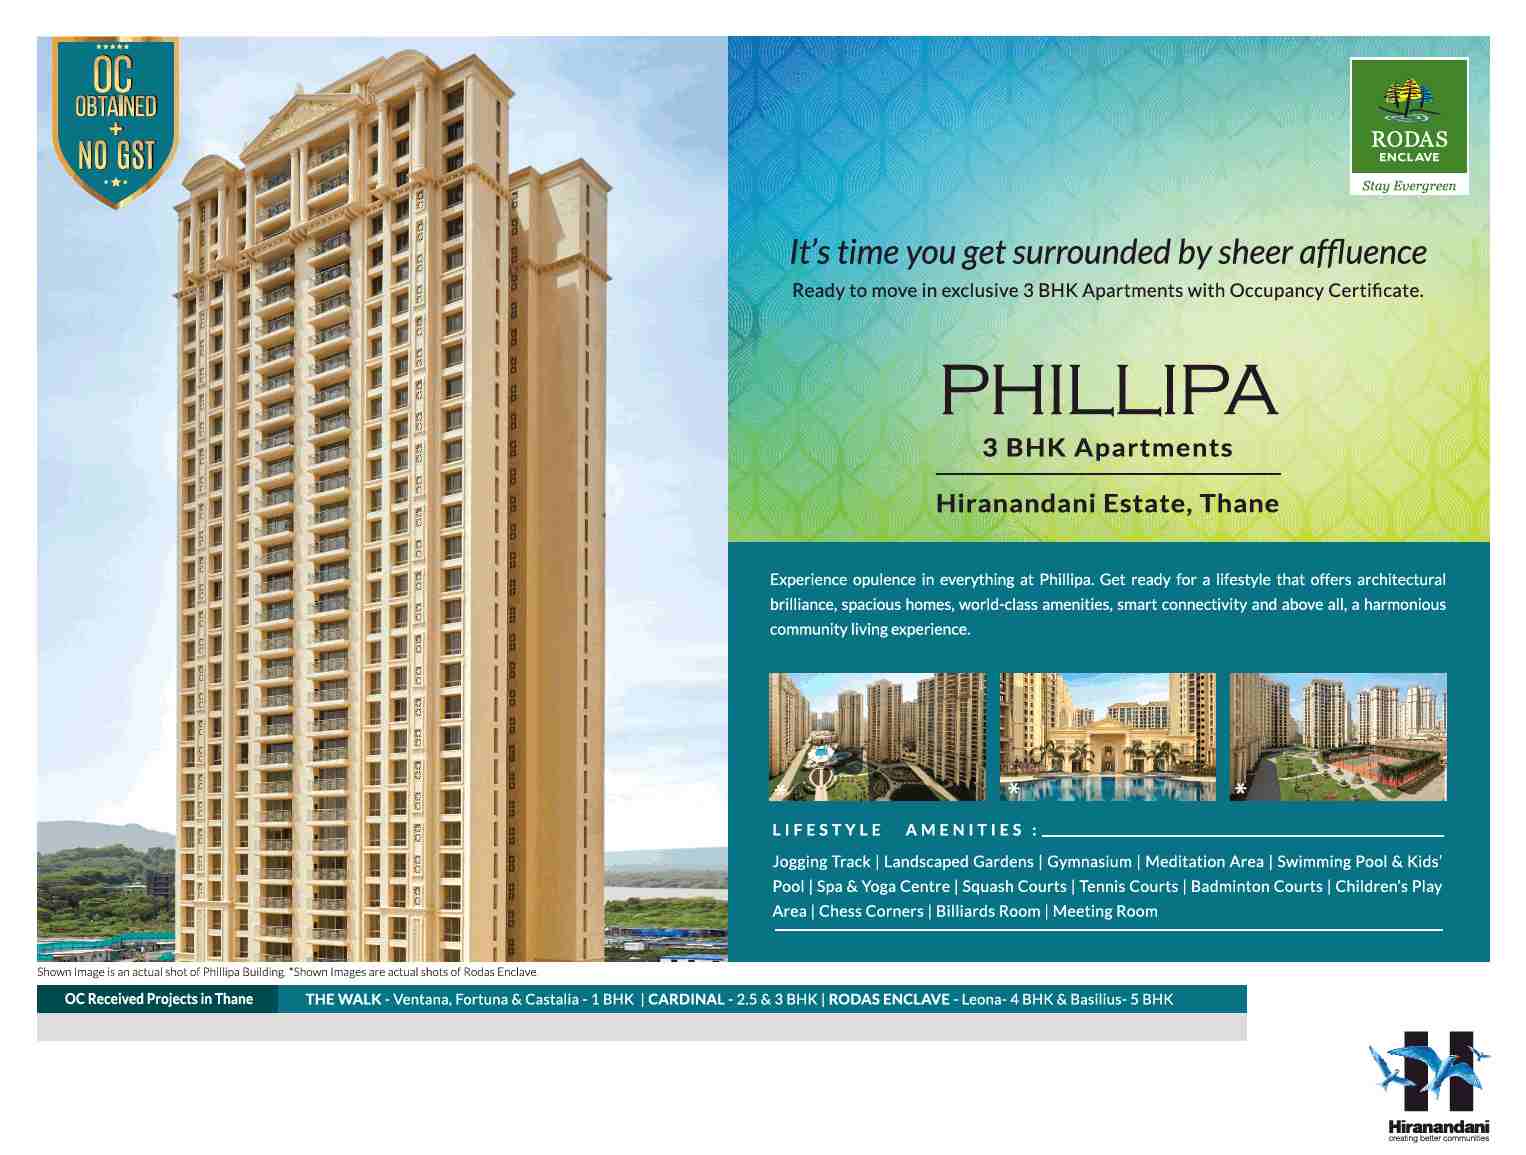 Experience opulence in everything at Hiranandani Rodas Enclave Phillipa in Mumbai Update